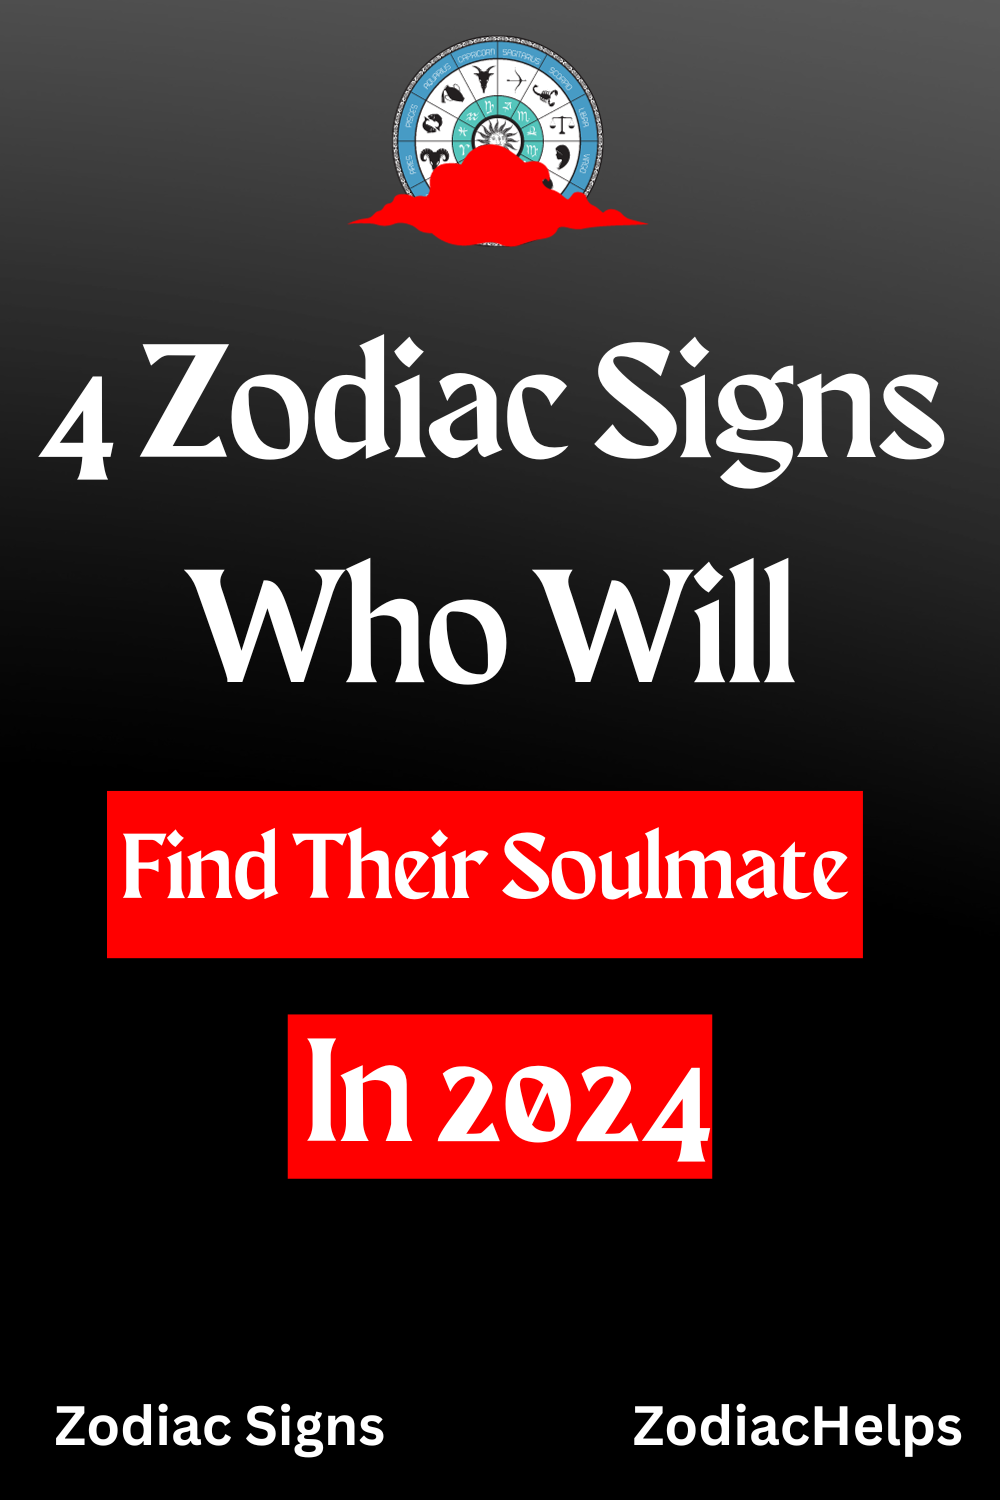 4 Zodiac Signs Who Will Find Their Soulmate In 2024